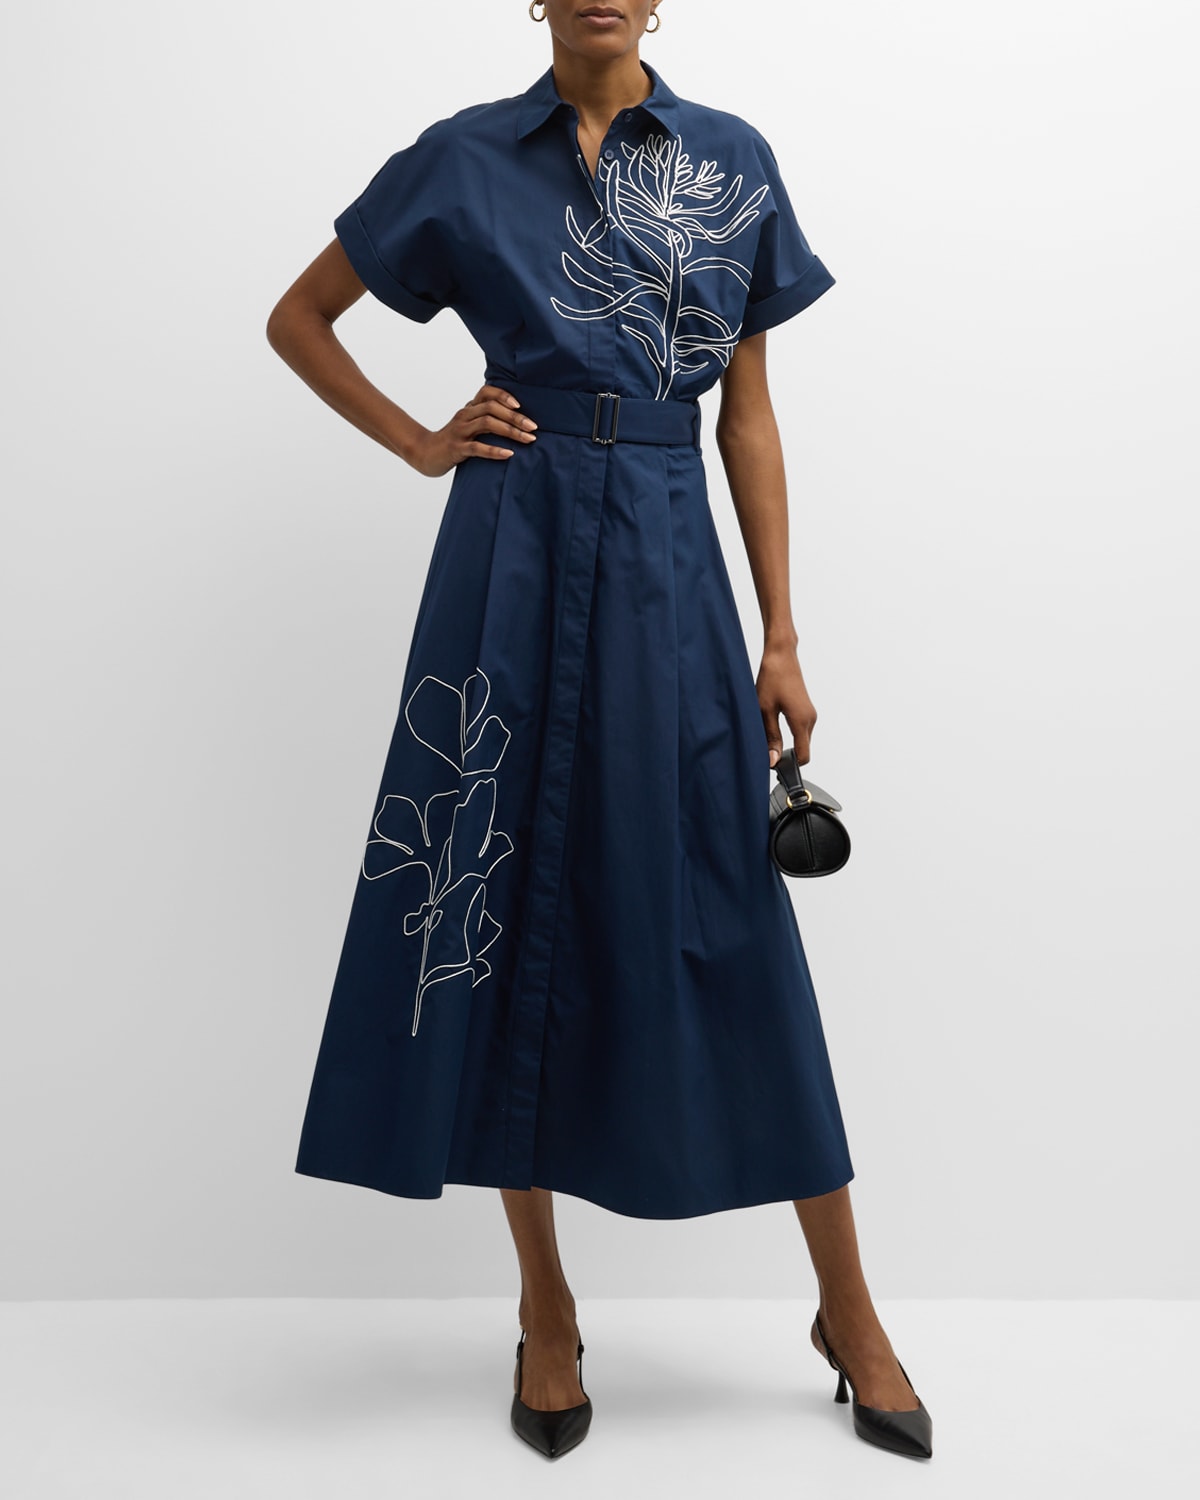 LAFAYETTE 148 FLORAL-EMBROIDERED COTTON MIDI SHIRTDRESS